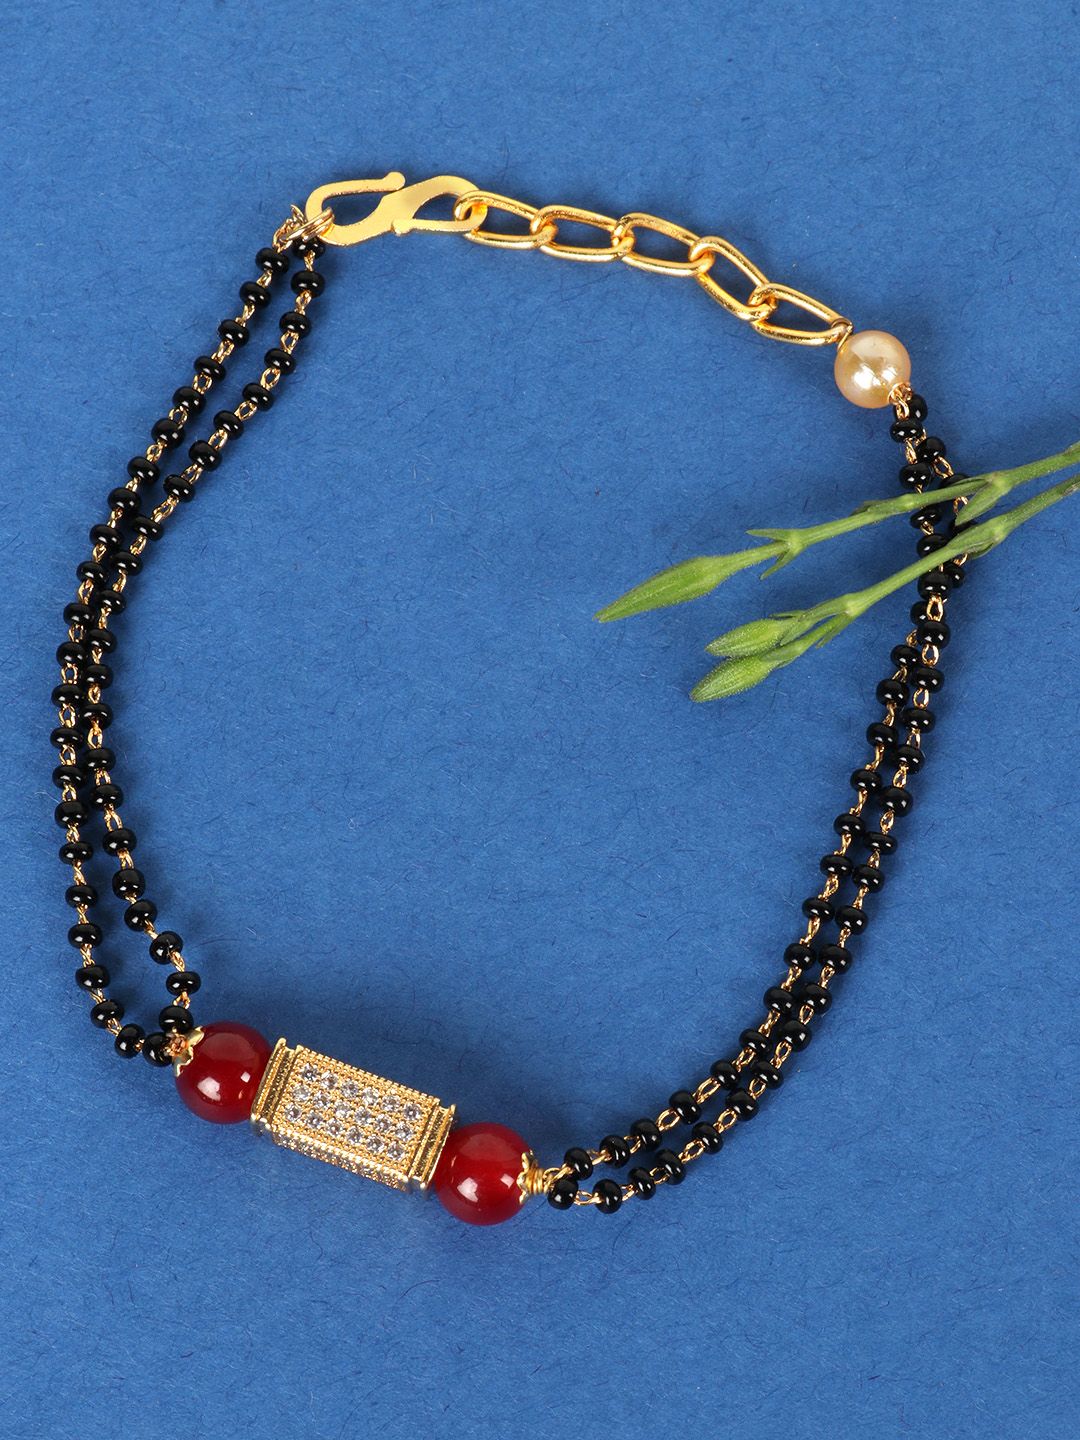 JEWELS GEHNA Black & Red Gold-Plated Beaded & AD-Studded Mangalsutra Bracelet Price in India